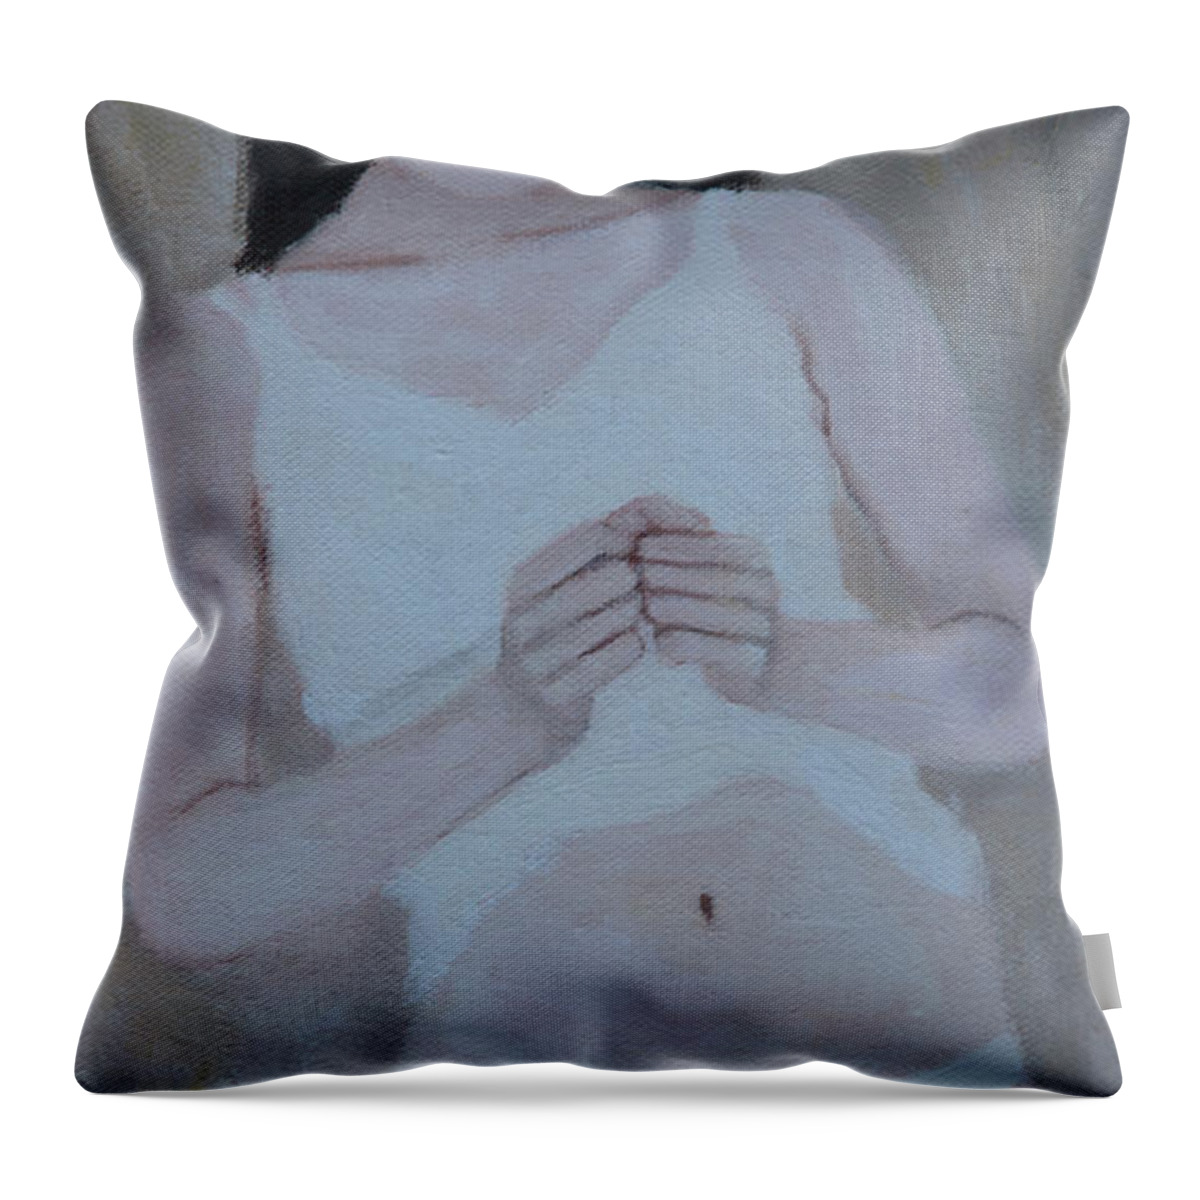 Portrait Throw Pillow featuring the painting Good Morning by Masami IIDA